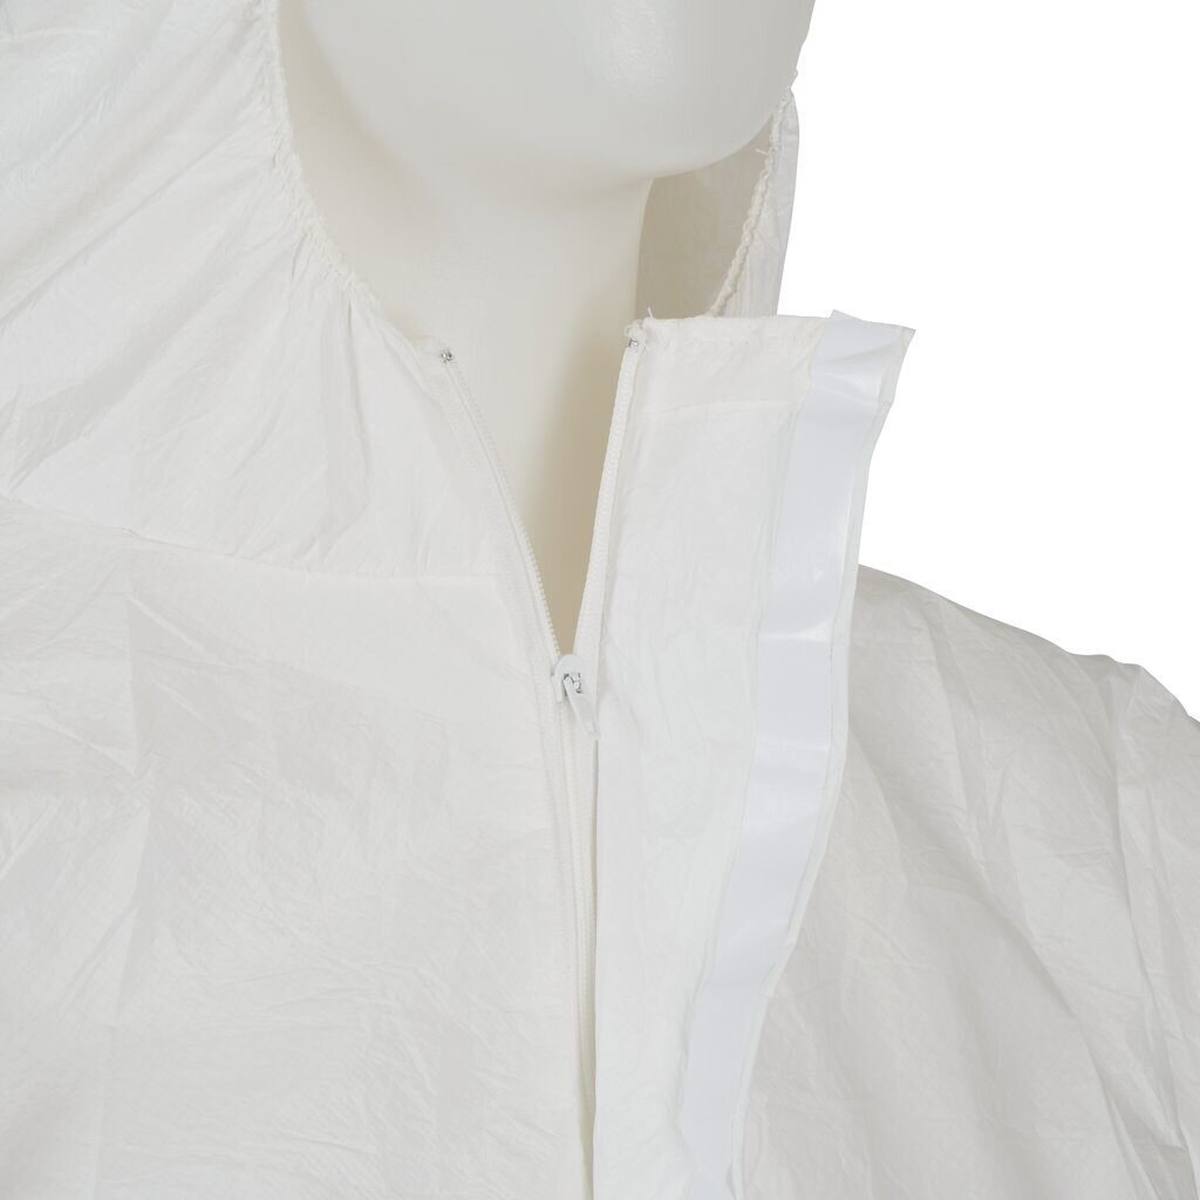 3M 4545 coverall, white, TYPE 5/6, size 2XL, material PE laminate, antistatic coating, particularly low-linting, detachable zipper, knitted cuffs